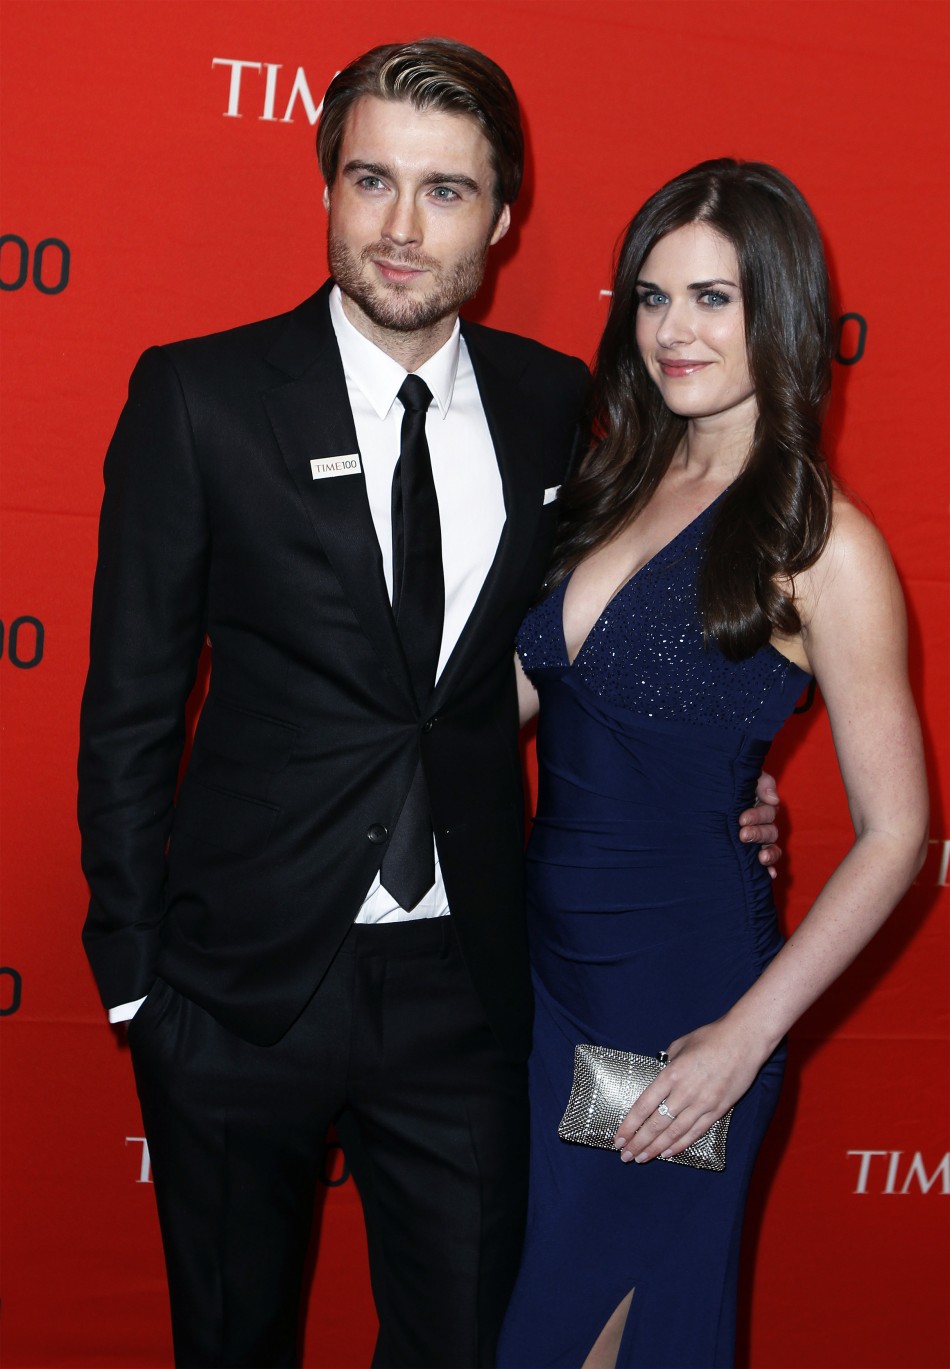 CEO of Mashable, Pete Cashmore, arrives with photographer Lisa Bettany to be honored at the Time 100 Gala in New York